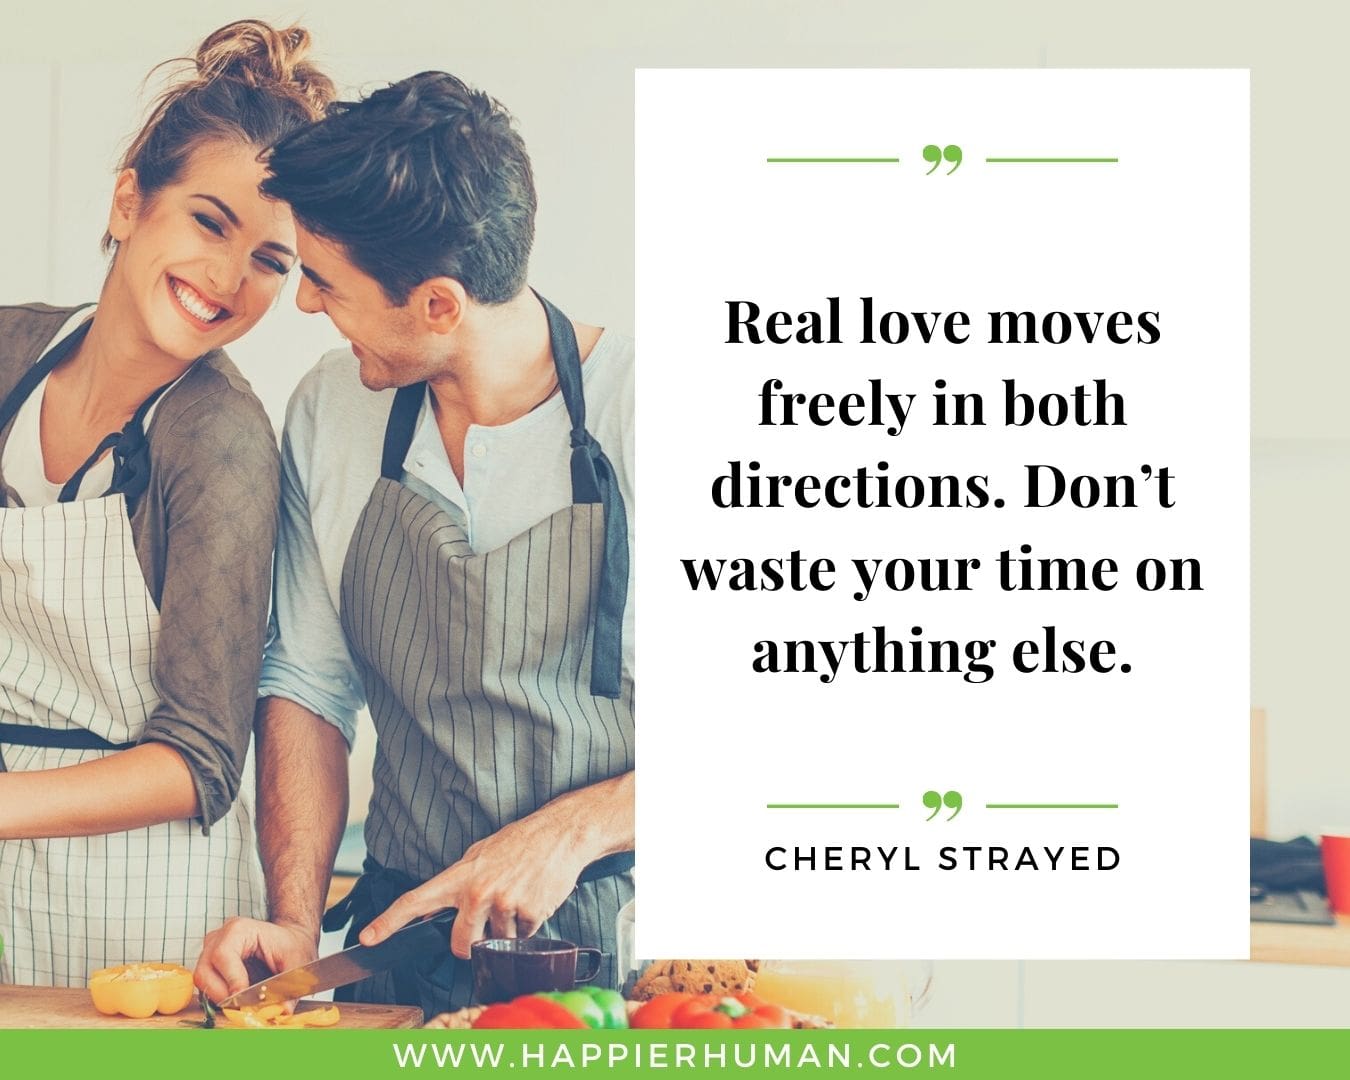 Toxic People Quotes - “Real love moves freely in both directions. Don’t waste your time on anything else.” – Cheryl Strayed